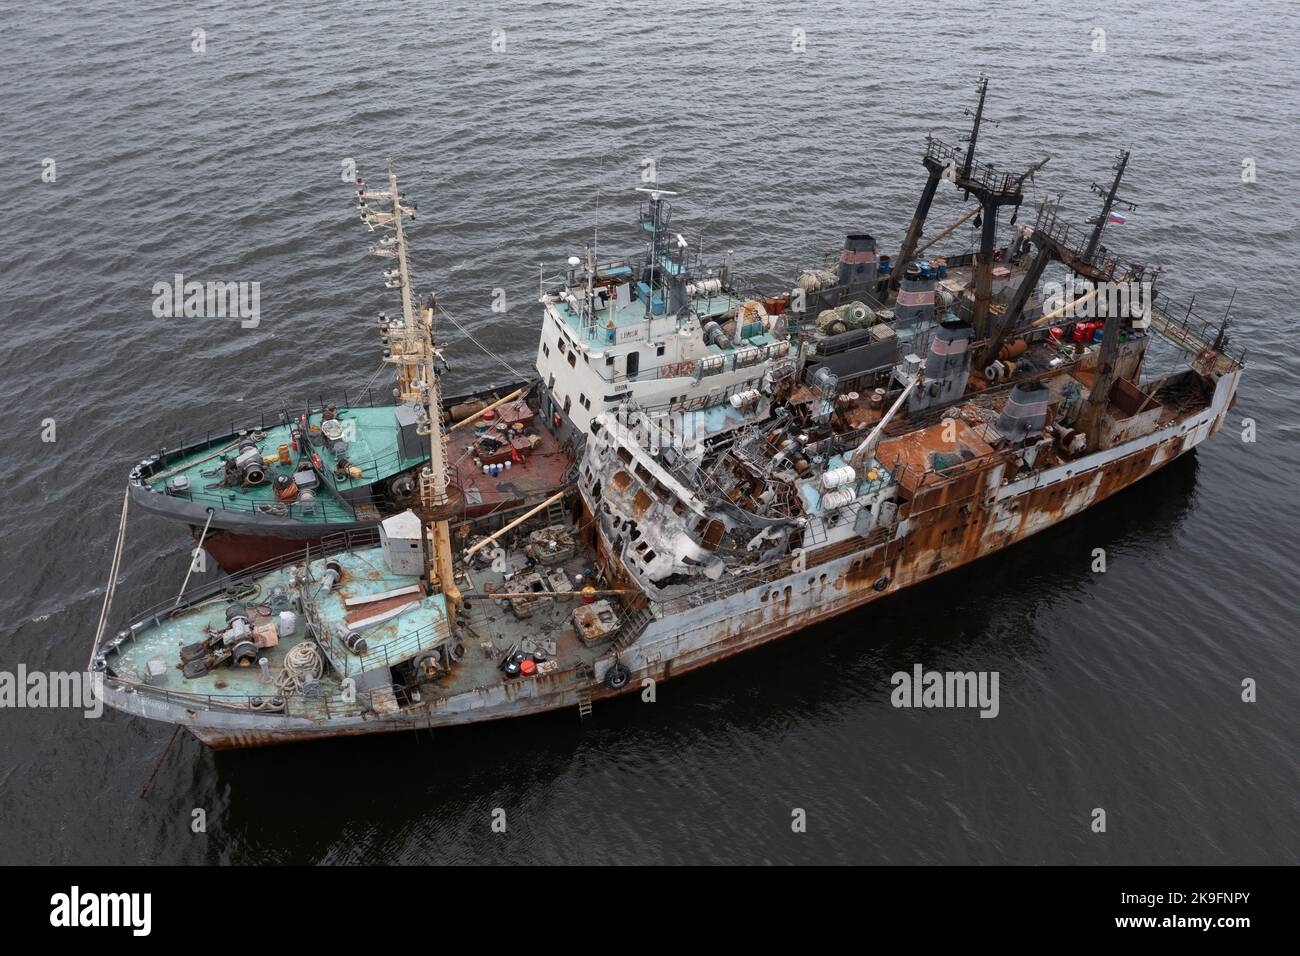 Vladivostok, Russia - July 23, 2022: The burnt fishing vessel on a mooring with other ship. Stock Photo